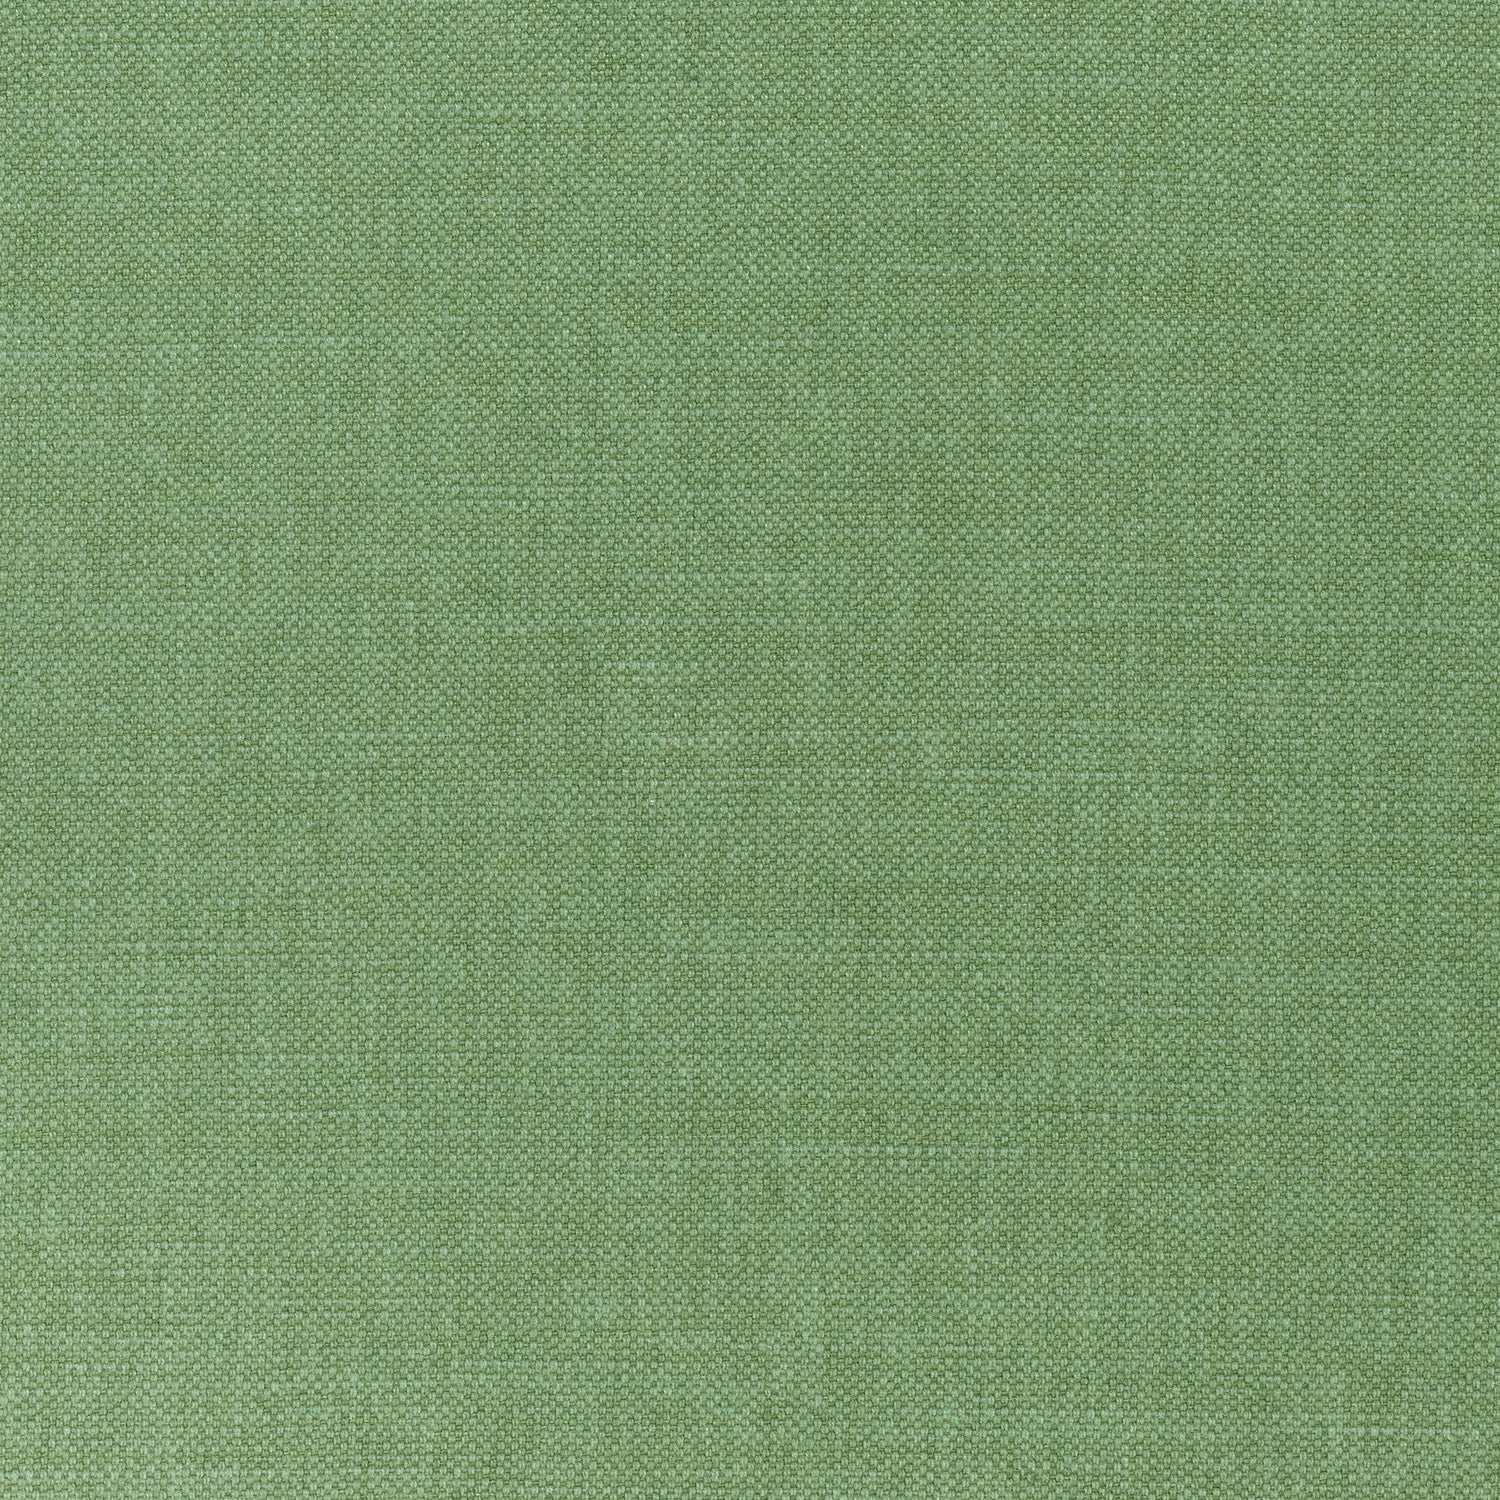 Prisma fabric in fern color - pattern number W70141 - by Thibaut in the Woven Resource Vol 12 Prisma Fabrics collection